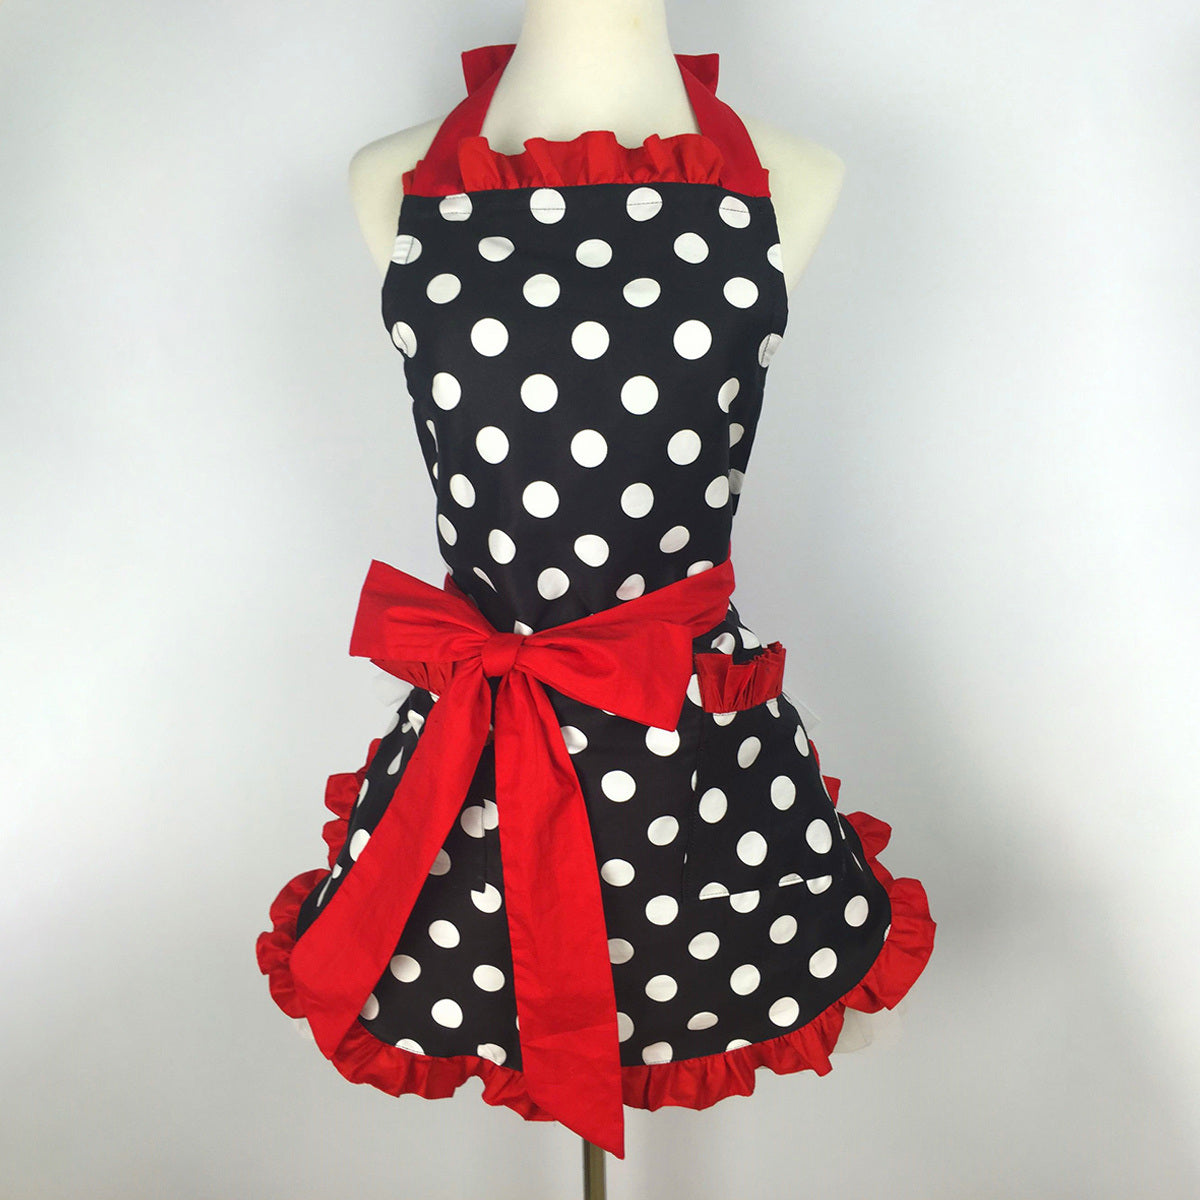 1pc Cute Apron, Retro Polka Dot Aprons, Ruffle Side Vintage Cooking Aprons With Pockets, Adjustable Kitchen Aprons For Women Girls, Waitress Chef, For Girls, Polyester Cotton Aprons